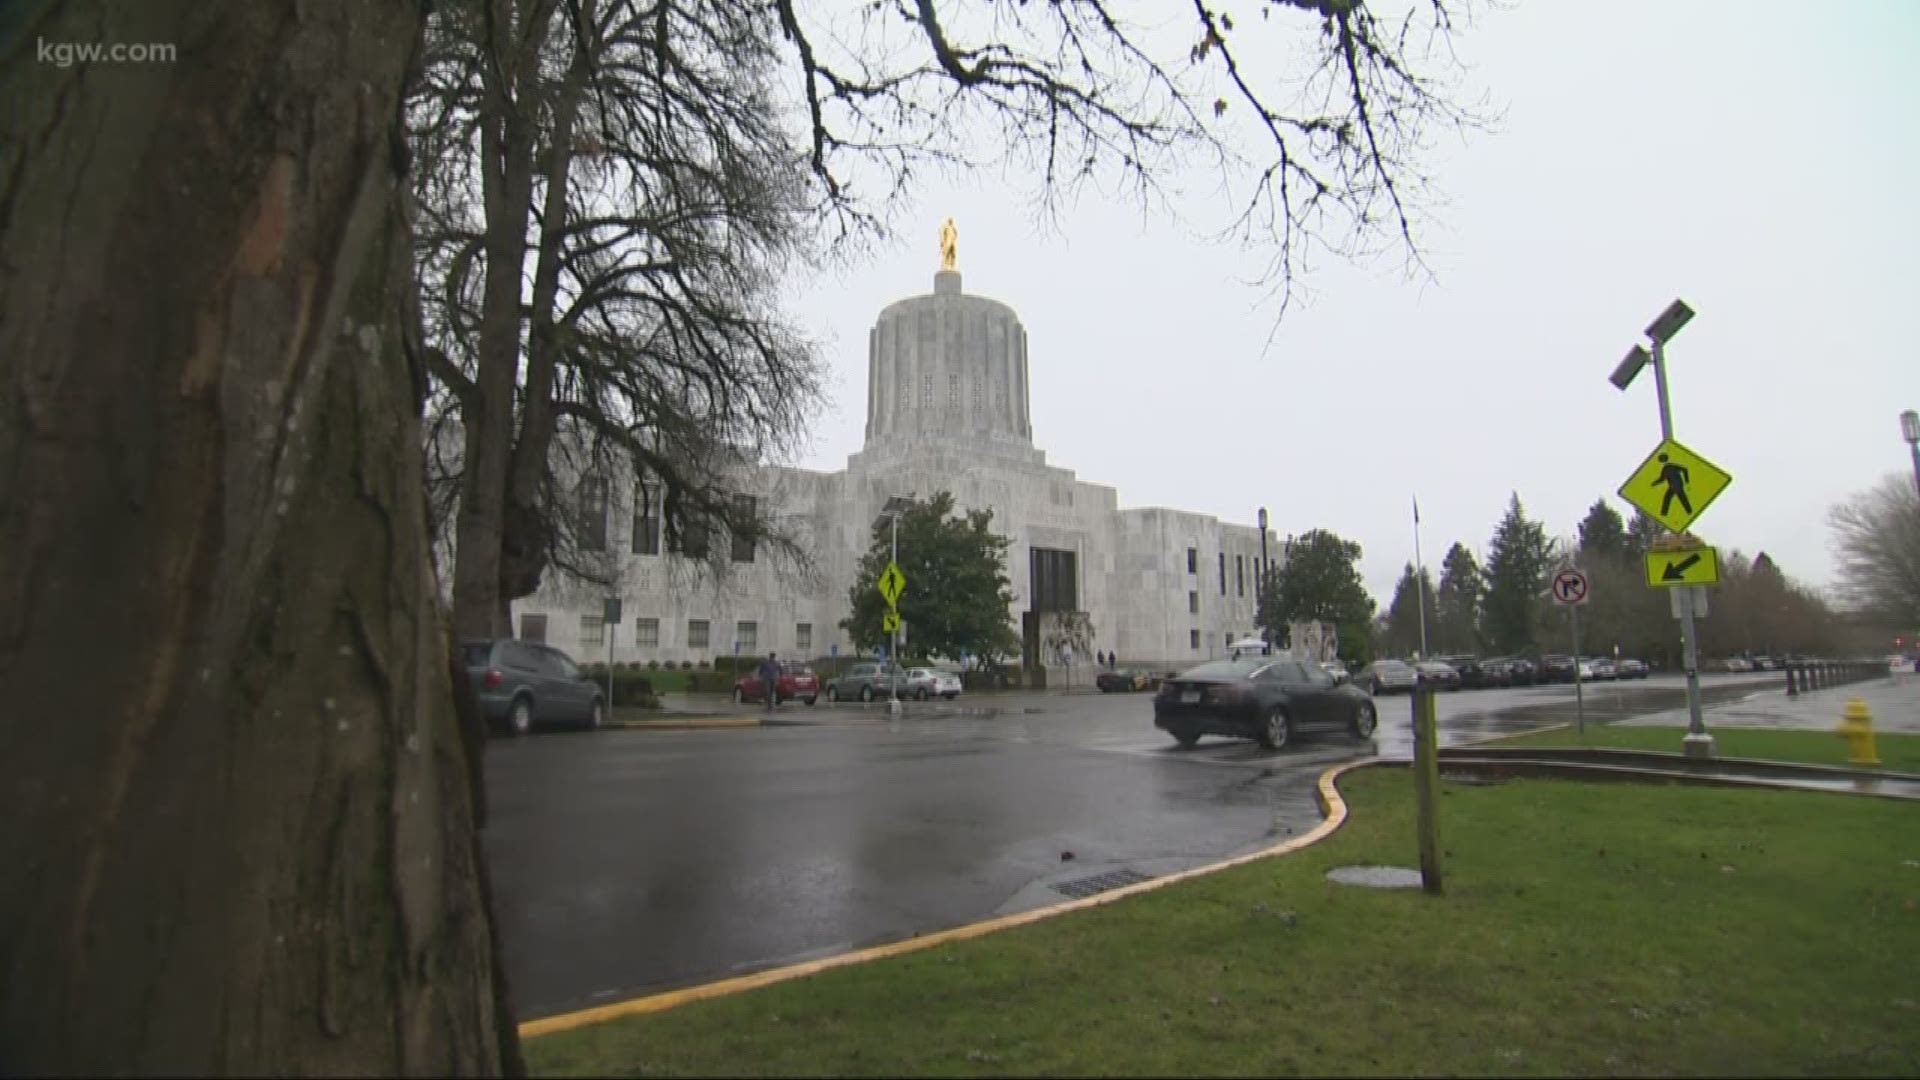 Cap and trade is back. A look at the new version of a cap and trade bill in Oregon.